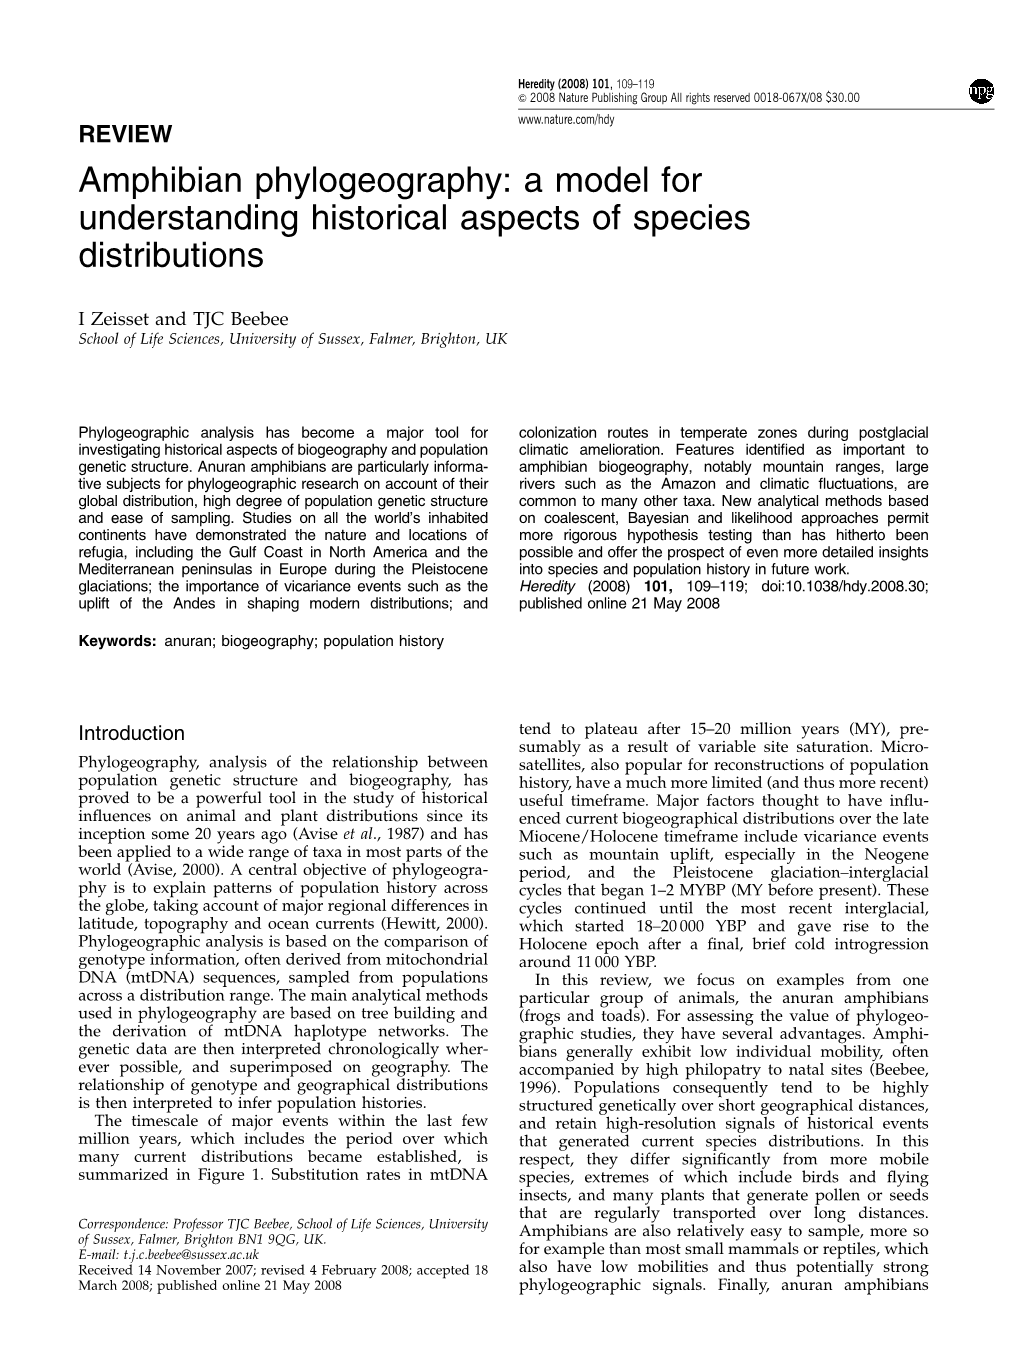 Amphibian Phylogeography: a Model for Understanding Historical Aspects of Species Distributions